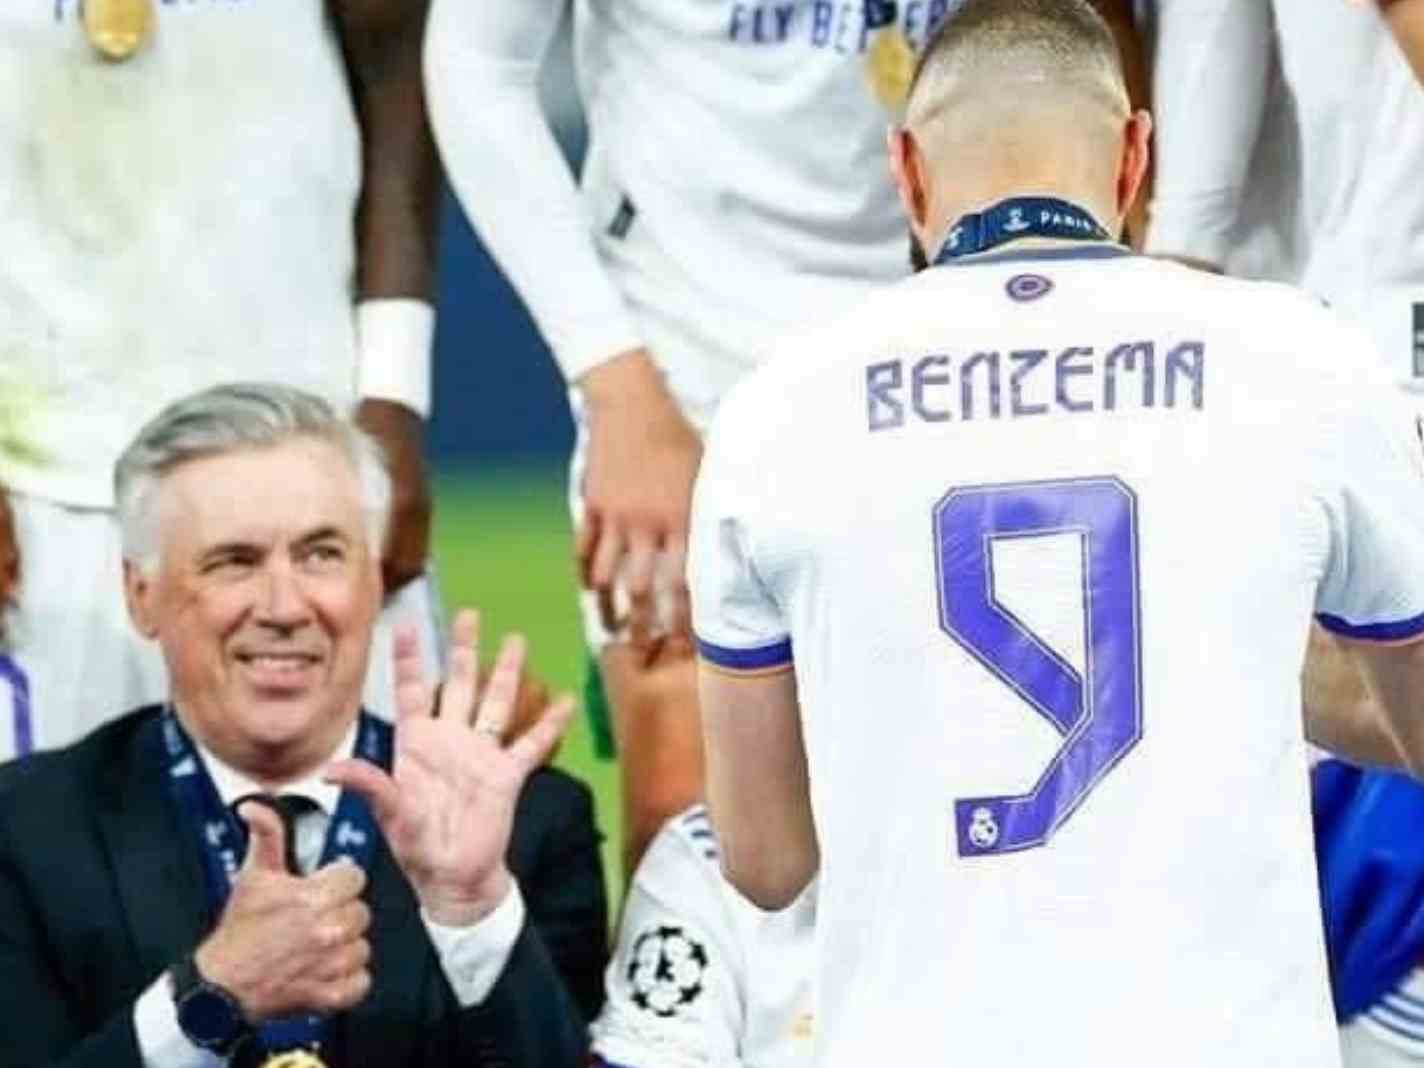 Carlo Ancelotti reminds Karim Benzema who’s boss by holding 6 fingers to his 5